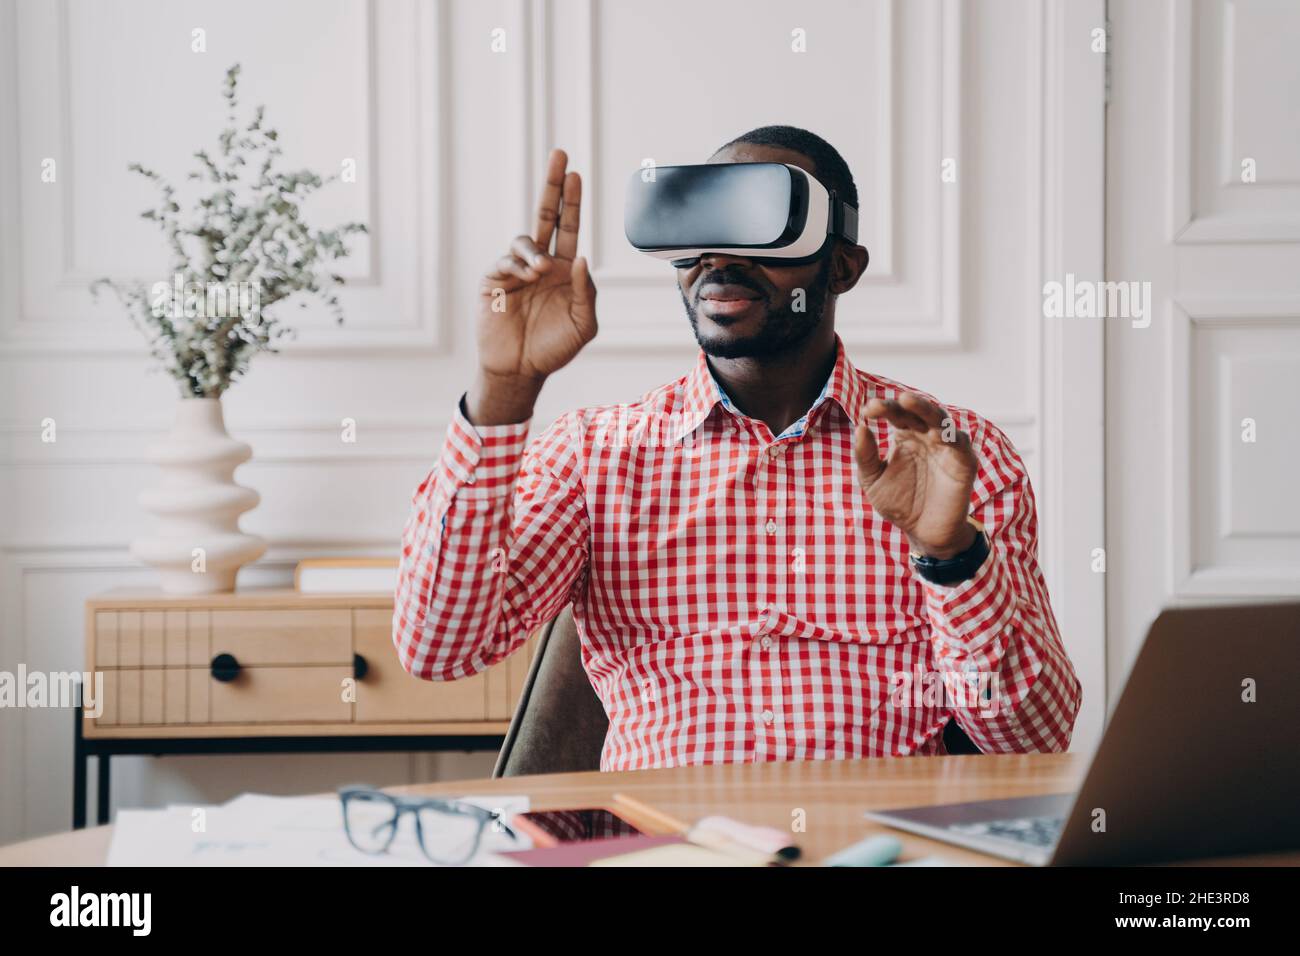 Focused Aframerican man in VR glasses enjoying augmented reality while sitting at workplace Stock Photo